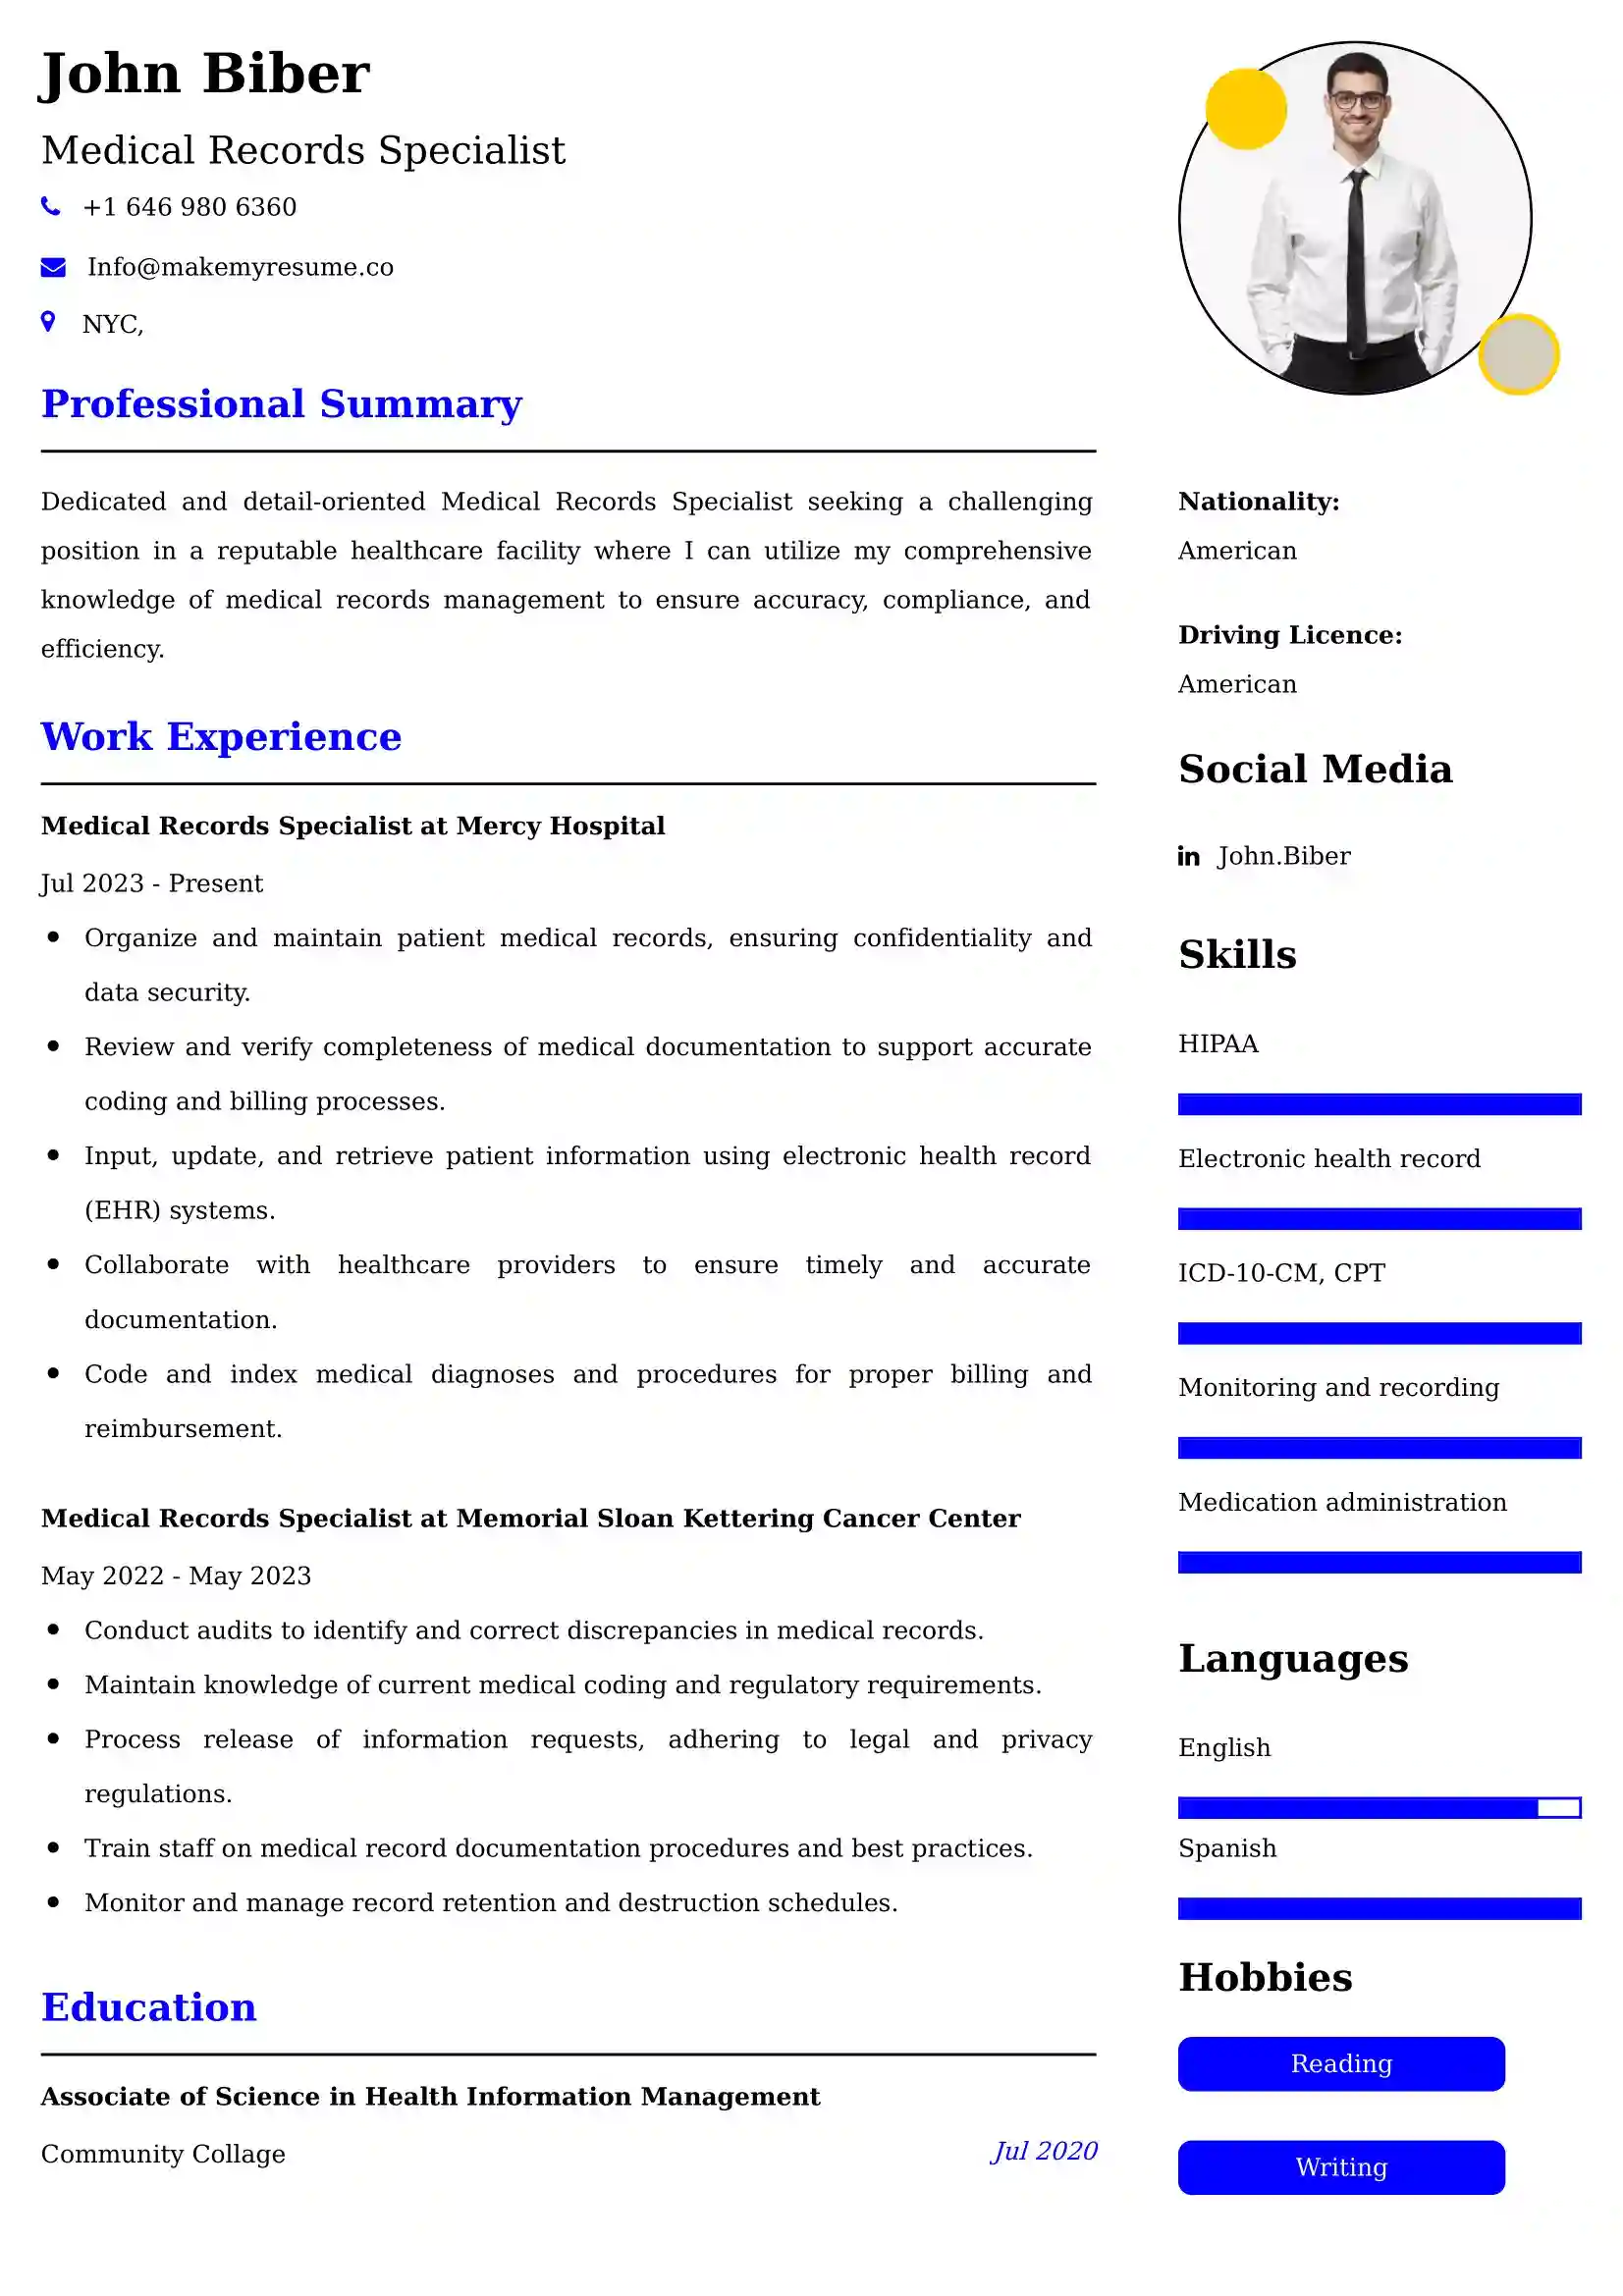 Medical Records Specialist Resume Examples for UK Jobs - Tips and Guide